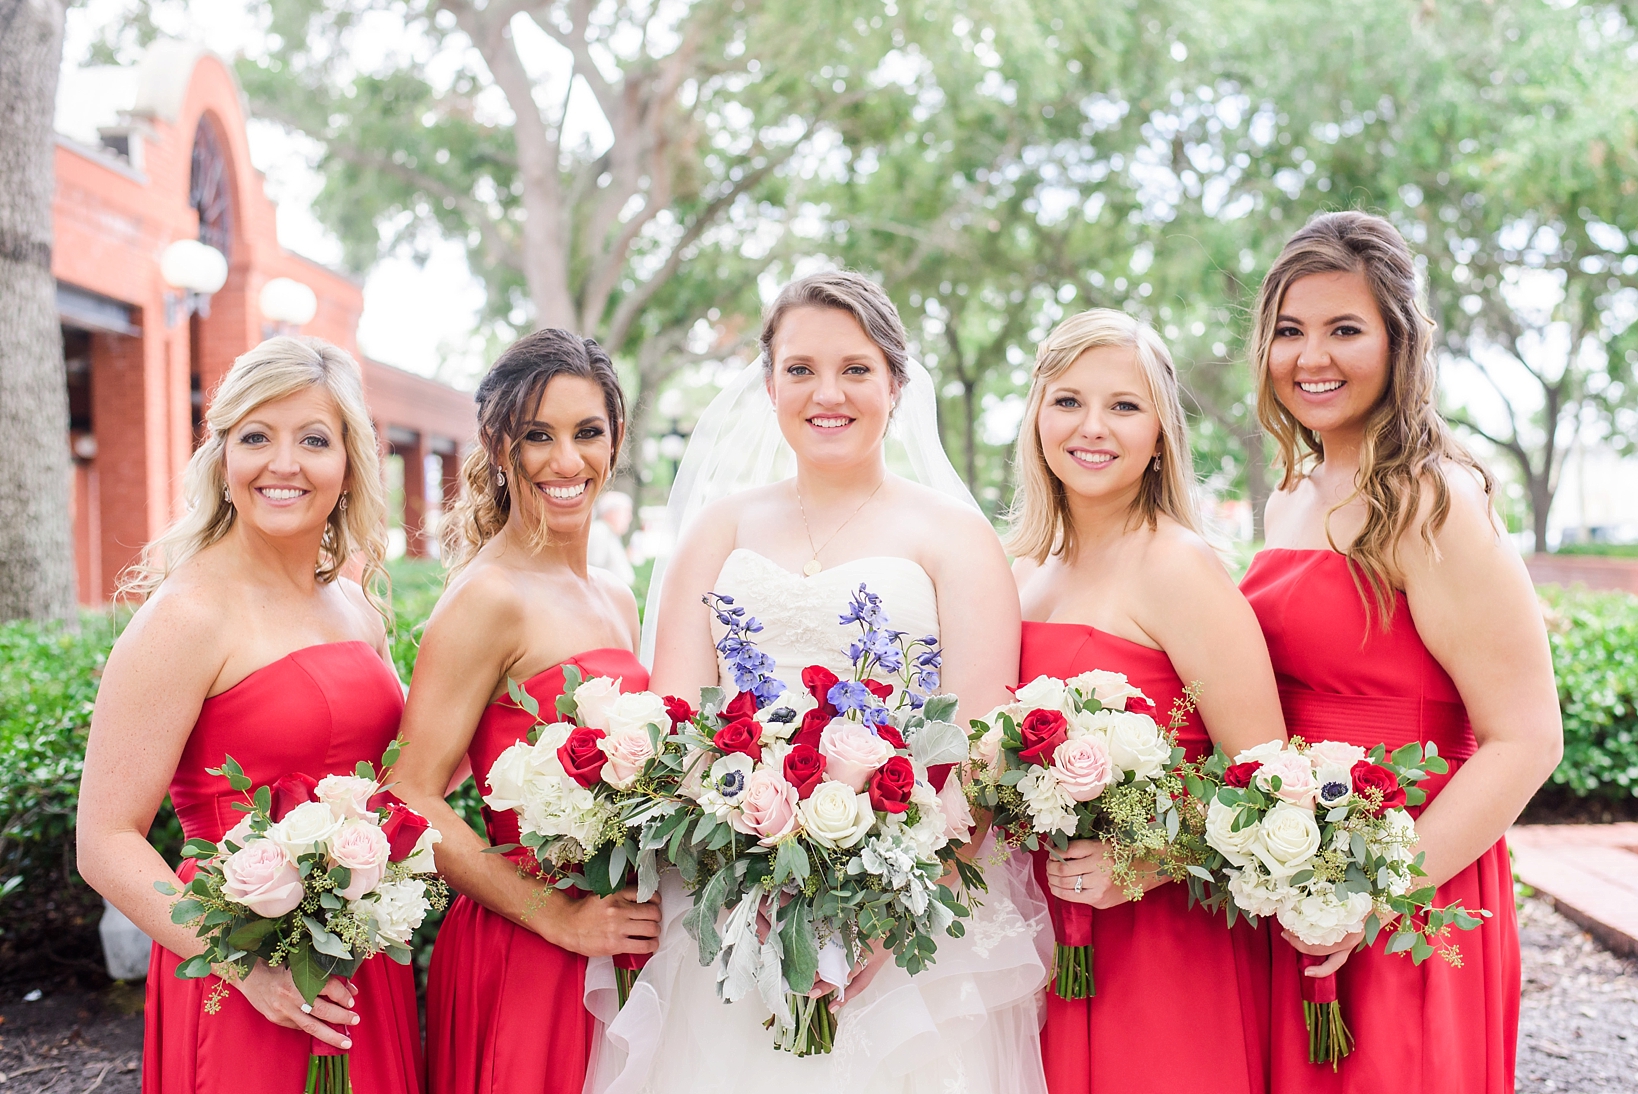 Classic portrait of the ladies of the bridal party